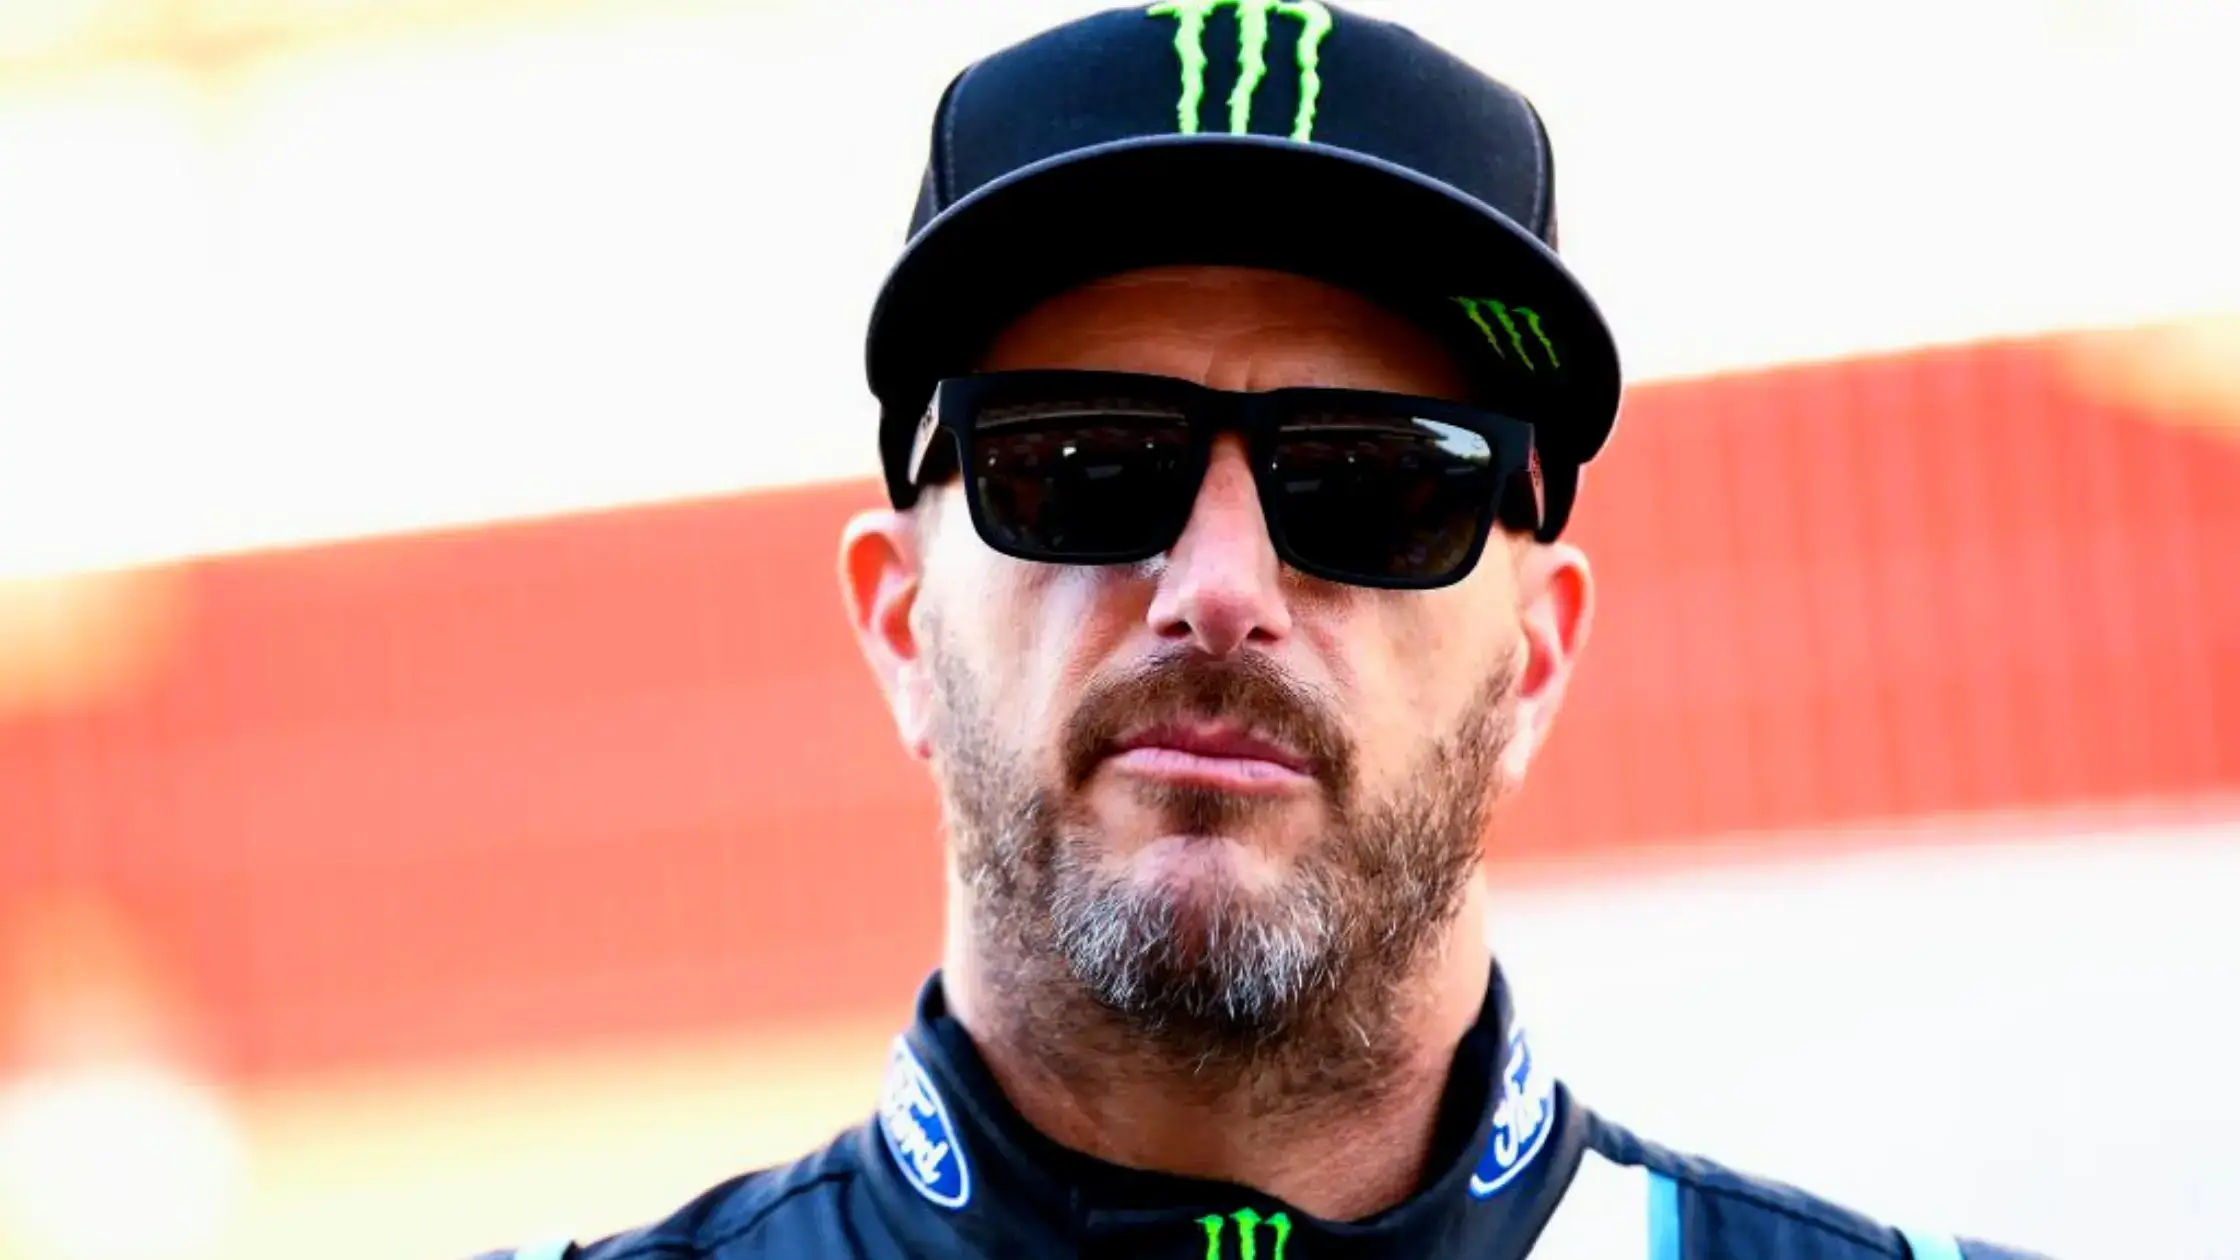 Remembering Ken Block Looking At His Career Achievements, YouTube Fame, And Other Contributions